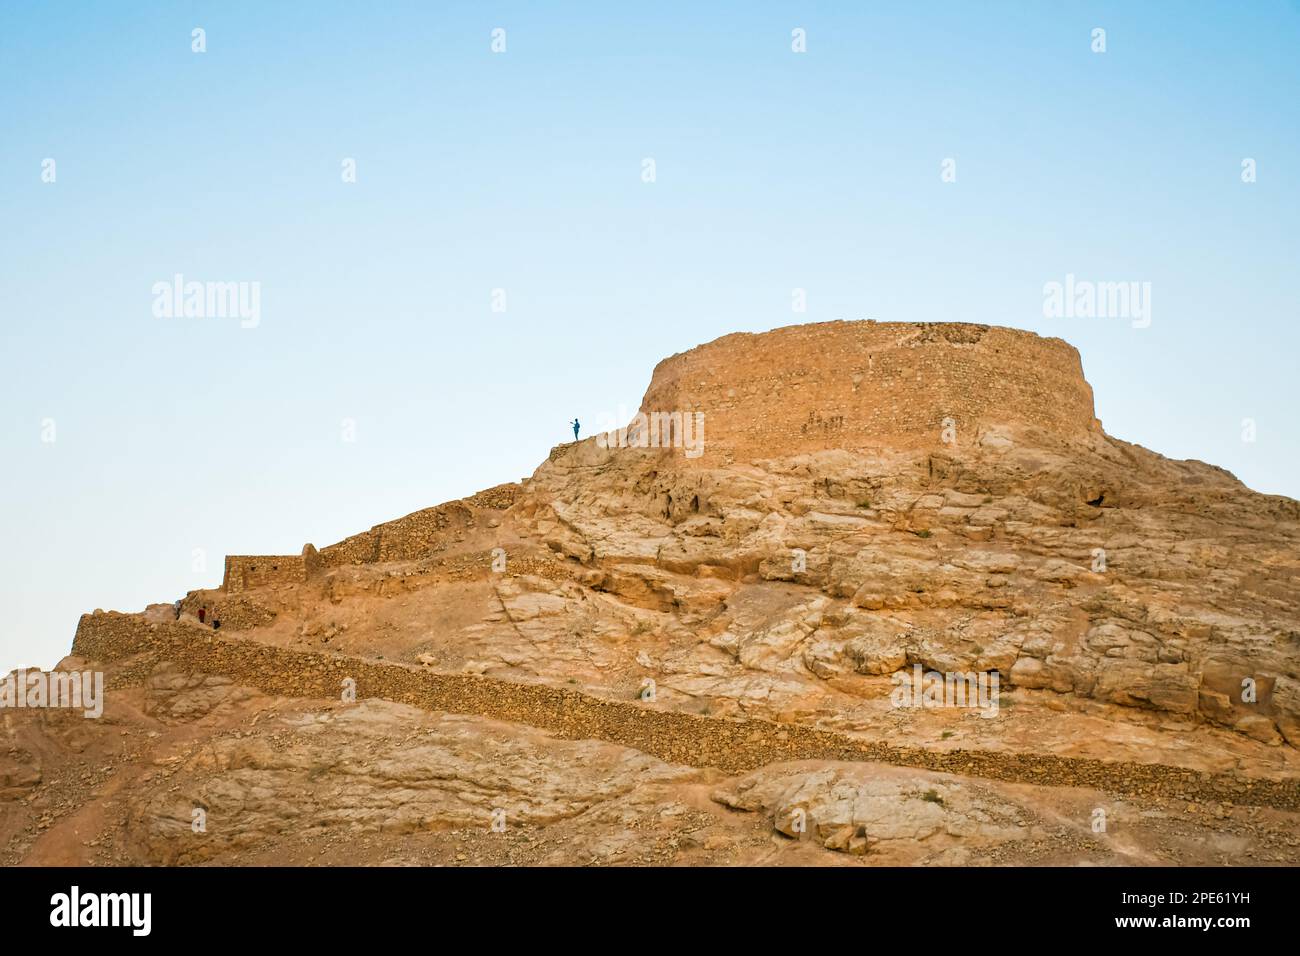 Fire temple on hilltop built by zoroastrians - old ancient civilization Stock Photo